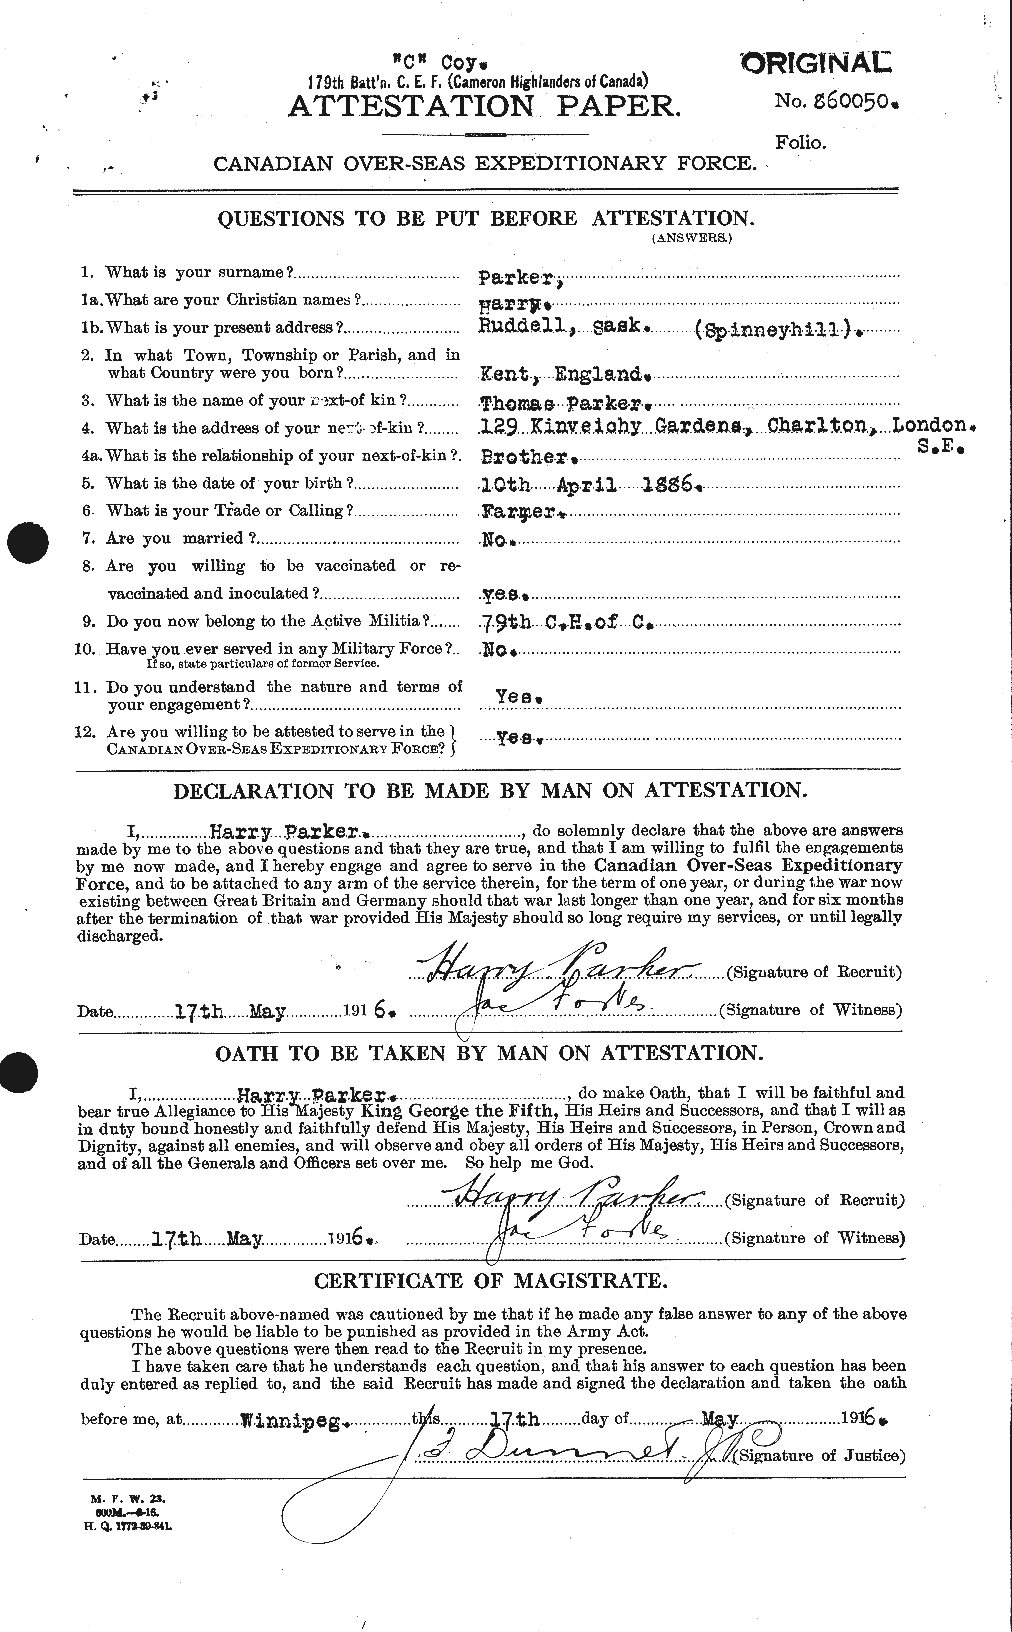 Personnel Records of the First World War - CEF 565318a